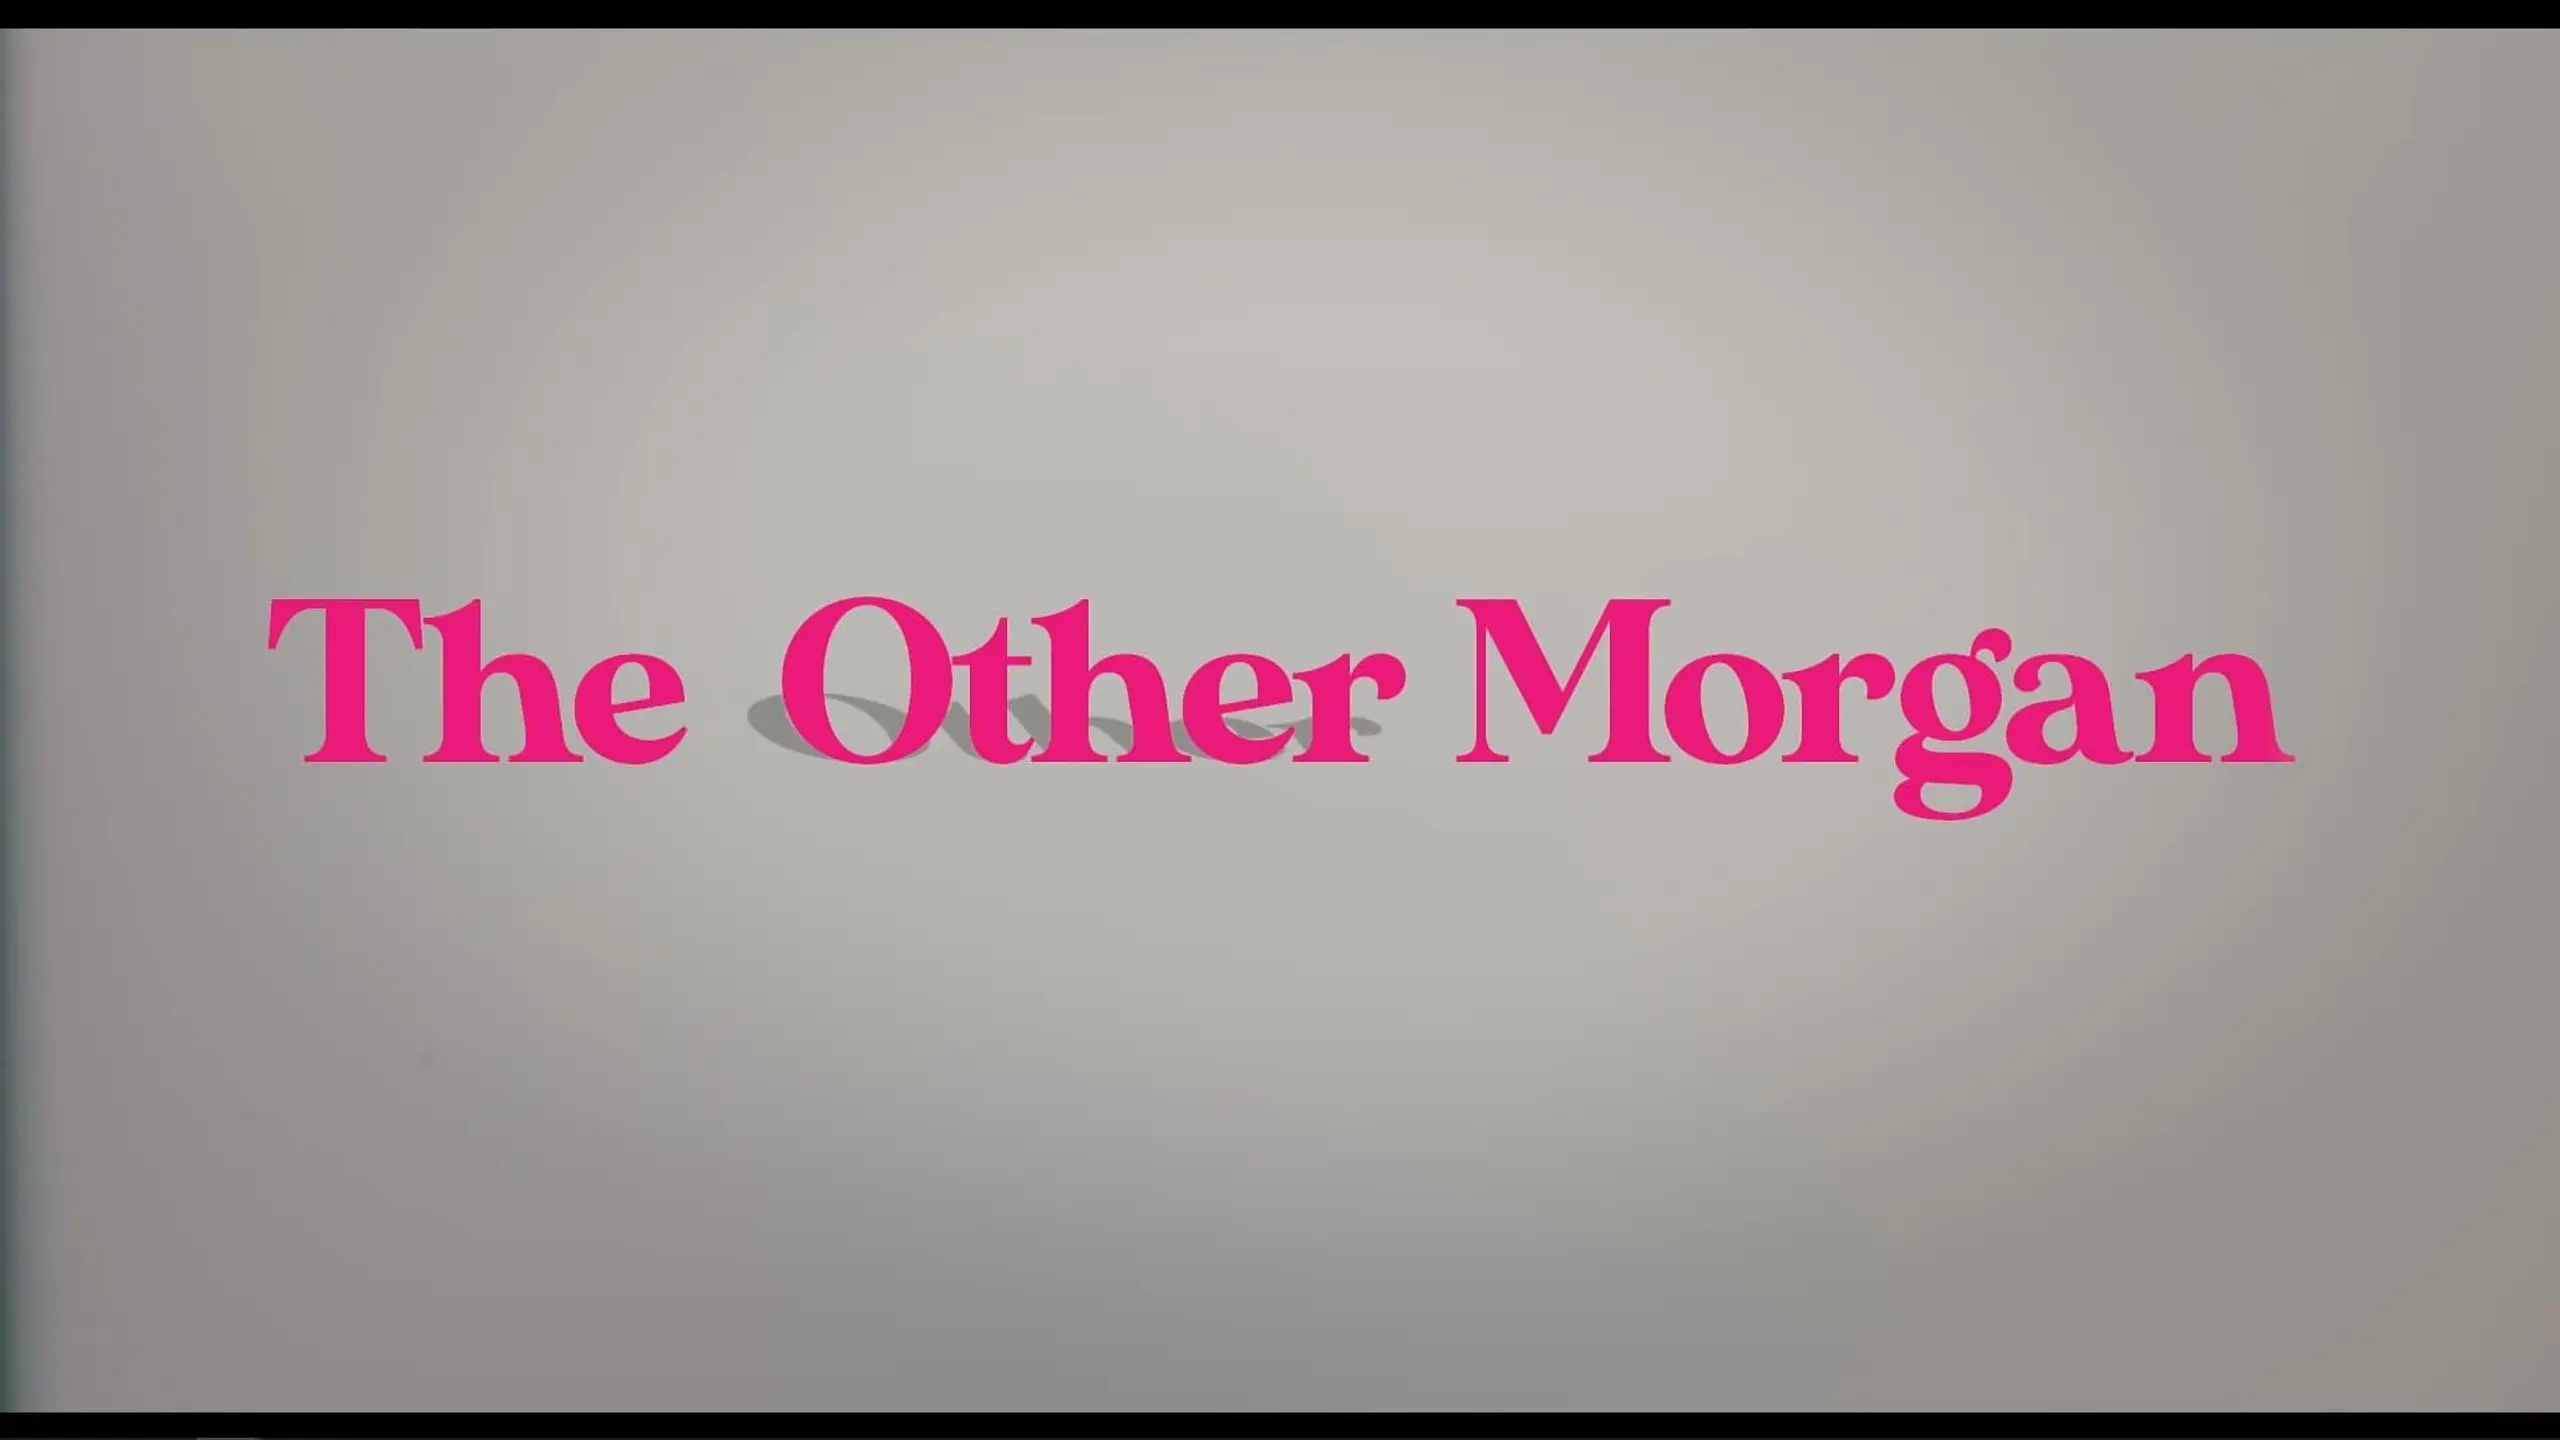 The Other Morgan